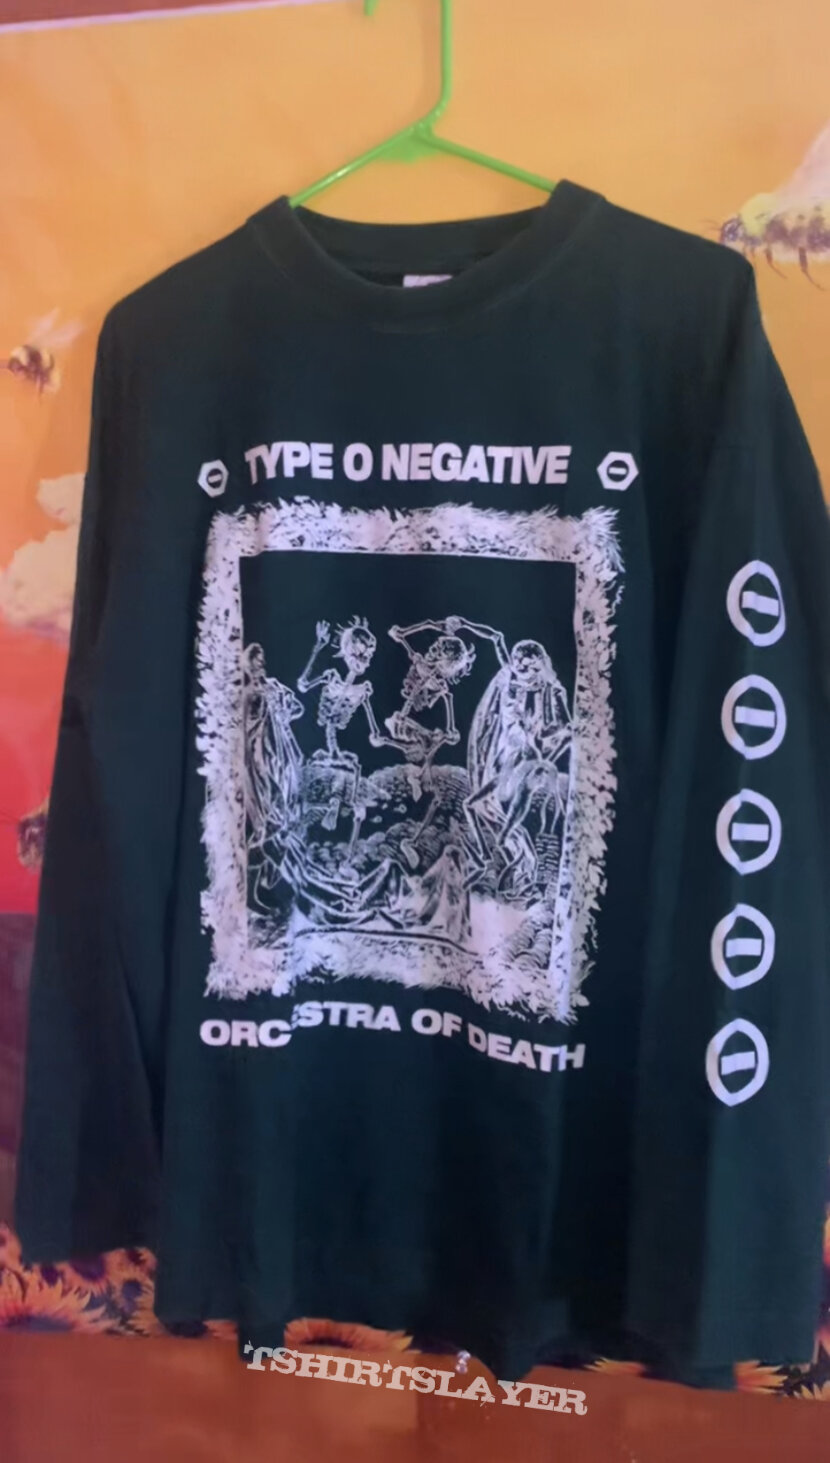 1995 Type O Negative “Orchestra Of Death” Longsleeve